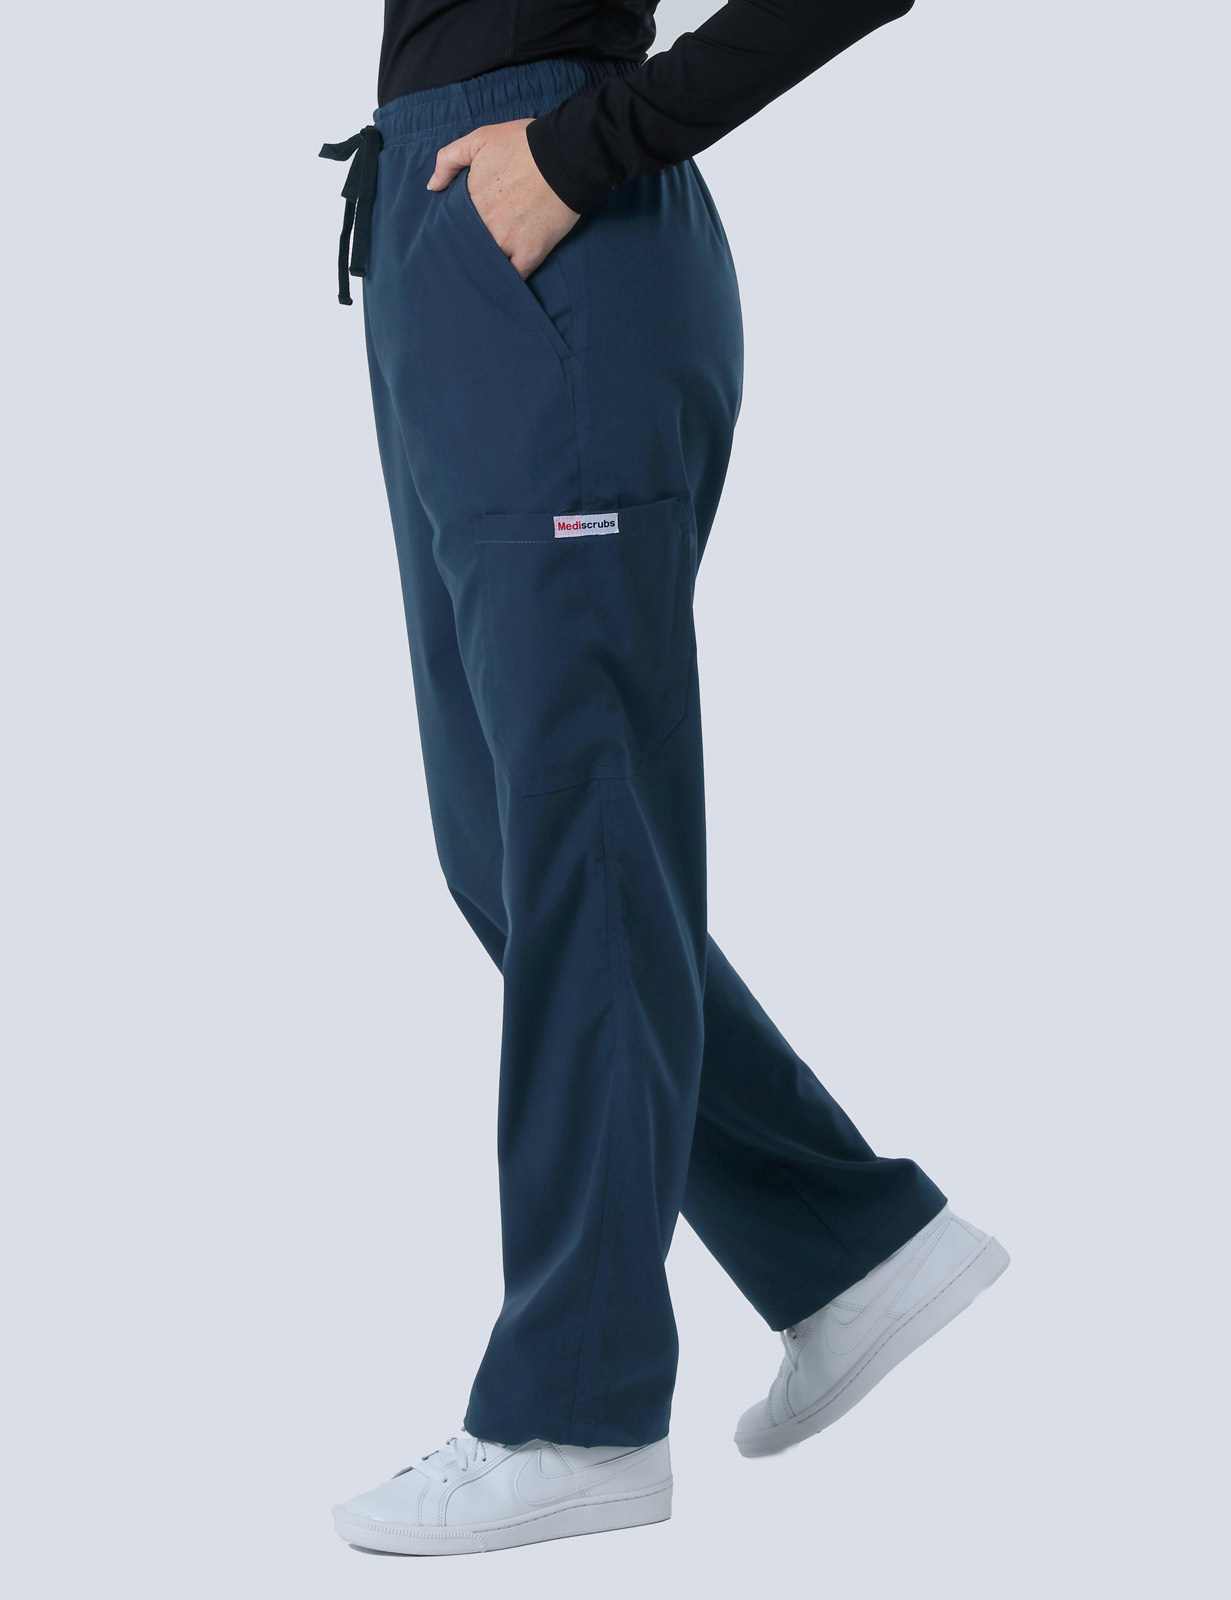 PAH - Infectious Diseases (4 Pocket Scrub Top and Cargo Pants in Navy incl Logos)